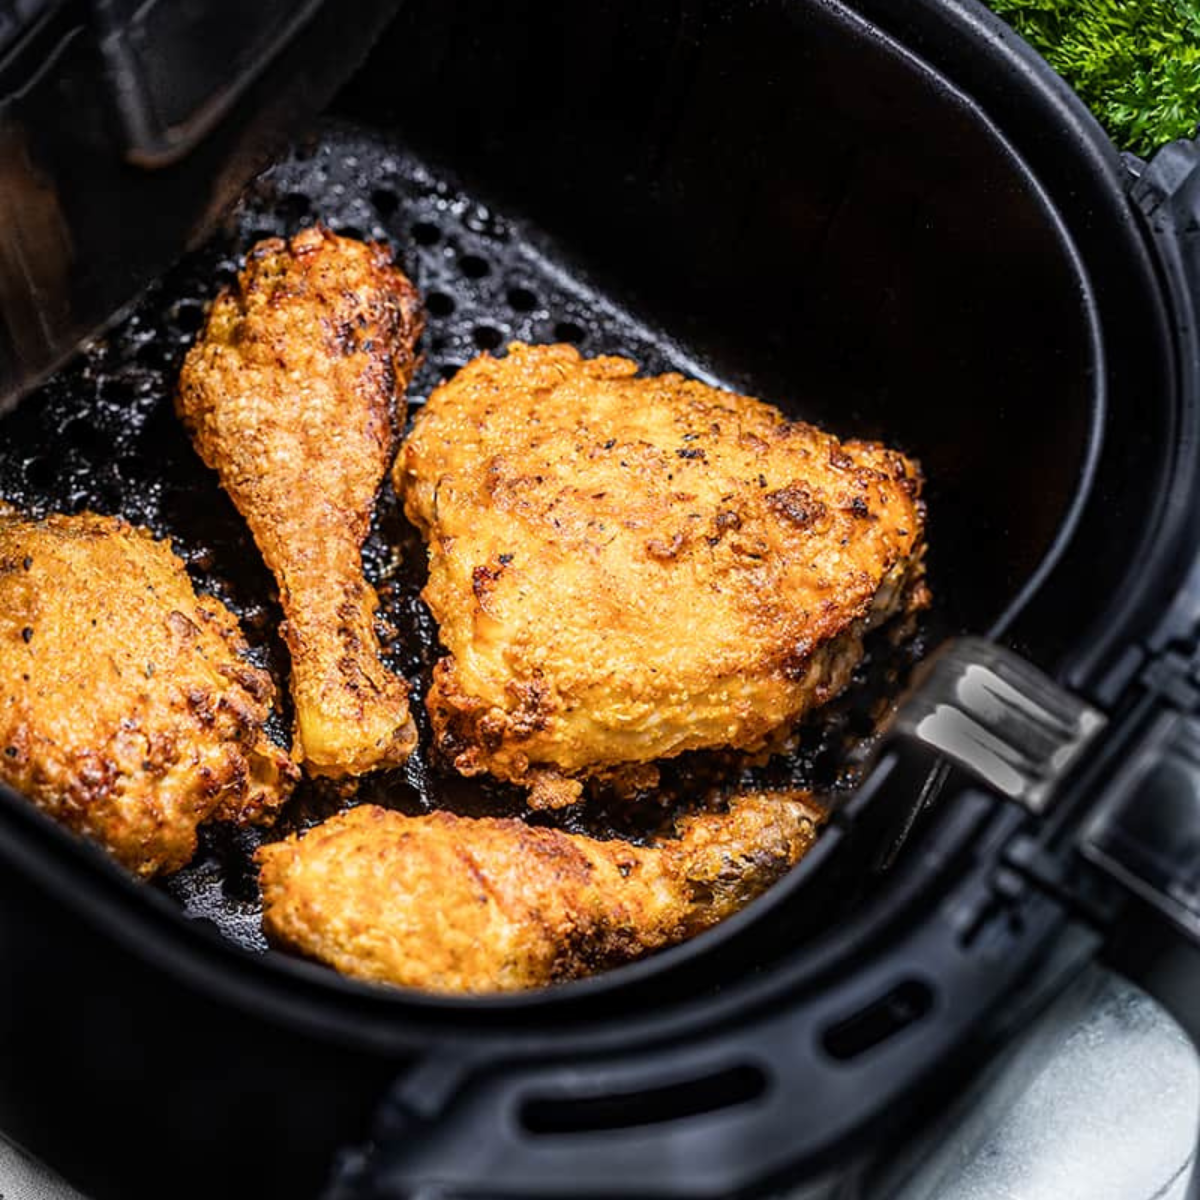 Decorative thumbnail preview image of Air Fryer Fried Chicken.